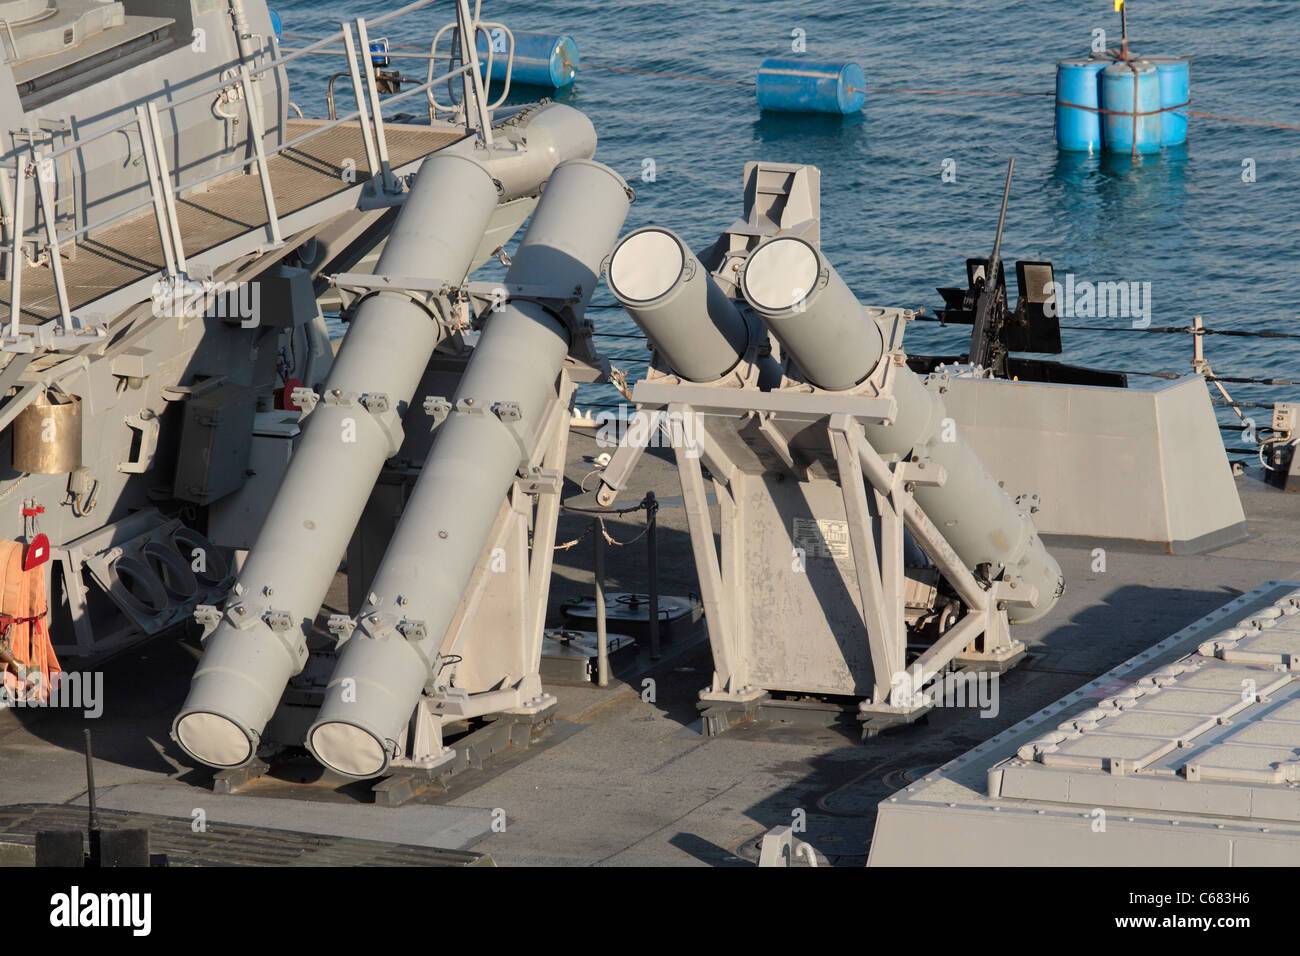 RGM-84 Harpoon anti-ship missile launchers on board the destroyer USS Carney. Military technology. Stock Photo